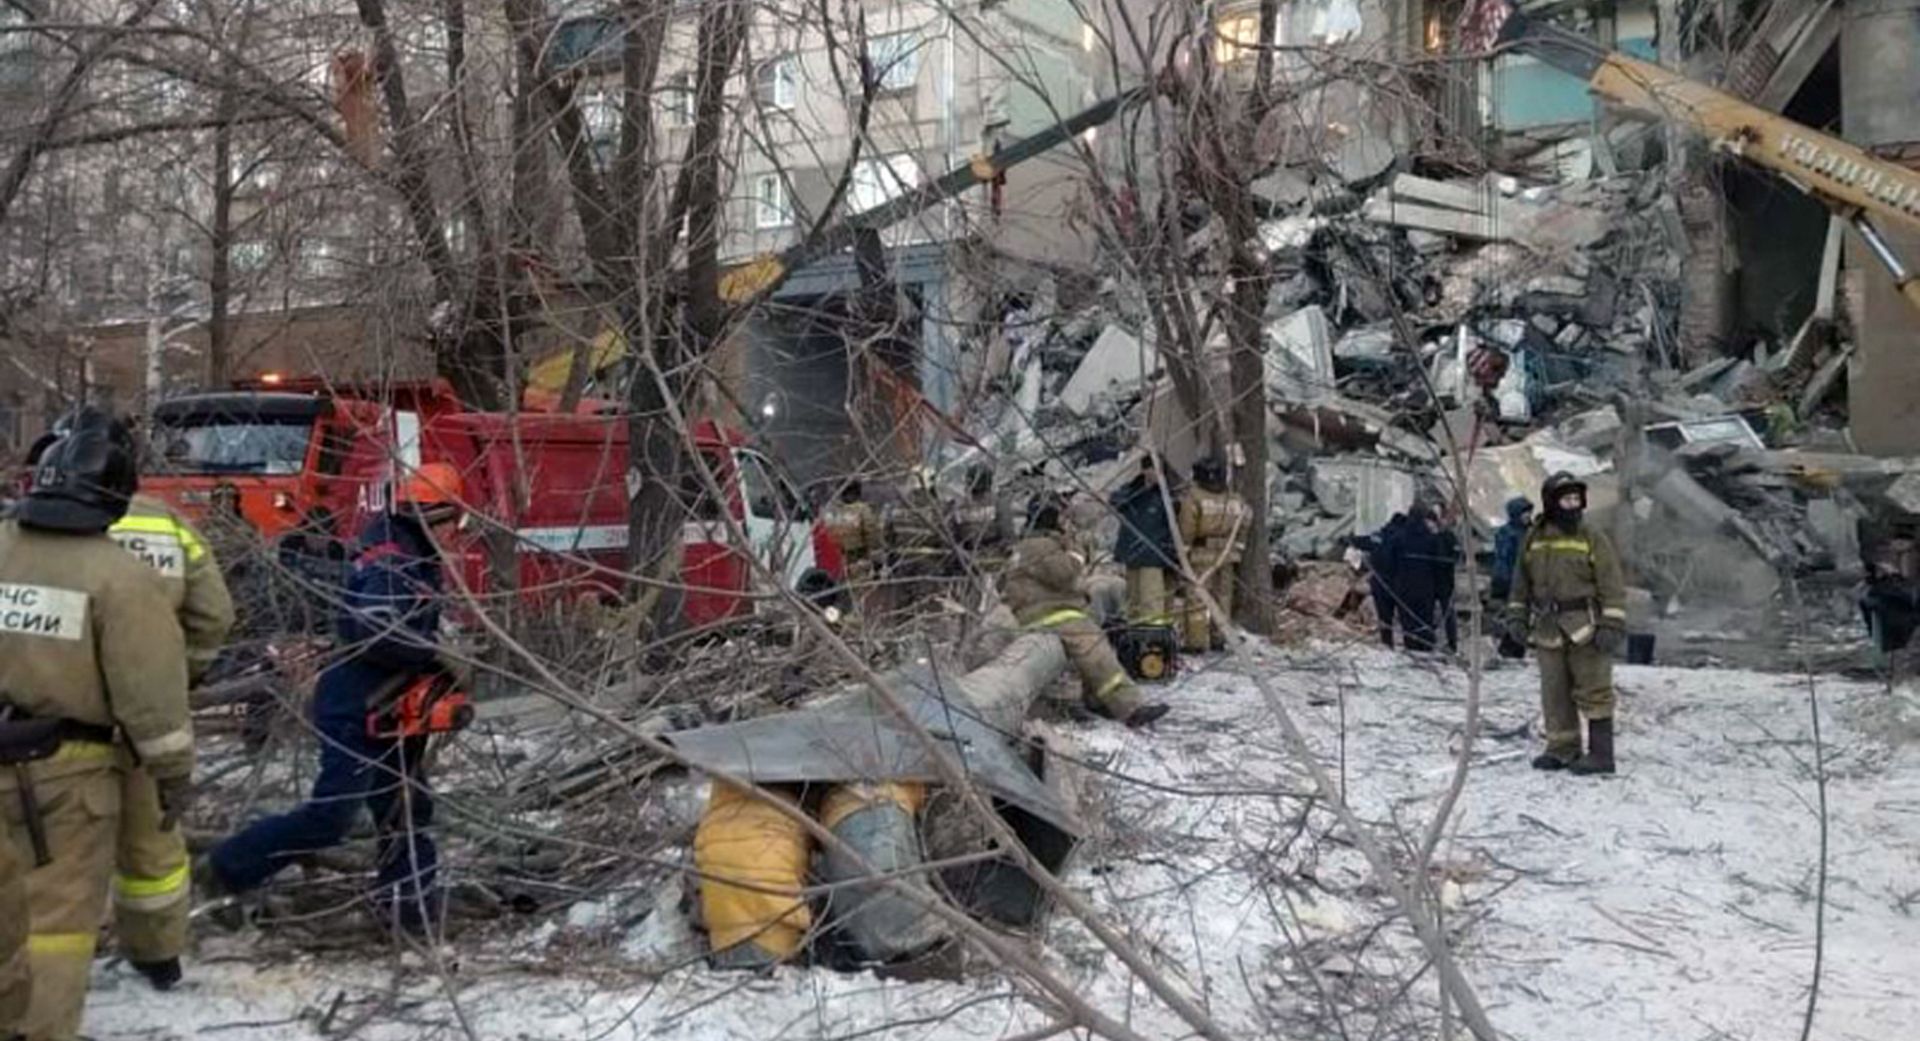 epa07255004 A handout photo made available by the Russian Ministry of Emergency Situations (EMERCOM) shows Russian rescue workers removing debris after a gas explosion in an apartment building in the city of Magnitogorsk, Chelyabinsk region, Russia, 31 December 2018. The explosion in a residential building in Magnitogorsk damaged 48 apartments, where 110 people lived. Six people were removed from the rubble: at least four died, two were injured, including one child. The fate of 68 residents is still unknown.  EPA/RUSSIAN EMERGENCY SITUATIONS MINISTRY HANDOUT -- BEST QUALITY AVAILABLE -- HANDOUT EDITORIAL USE ONLY/NO SALES